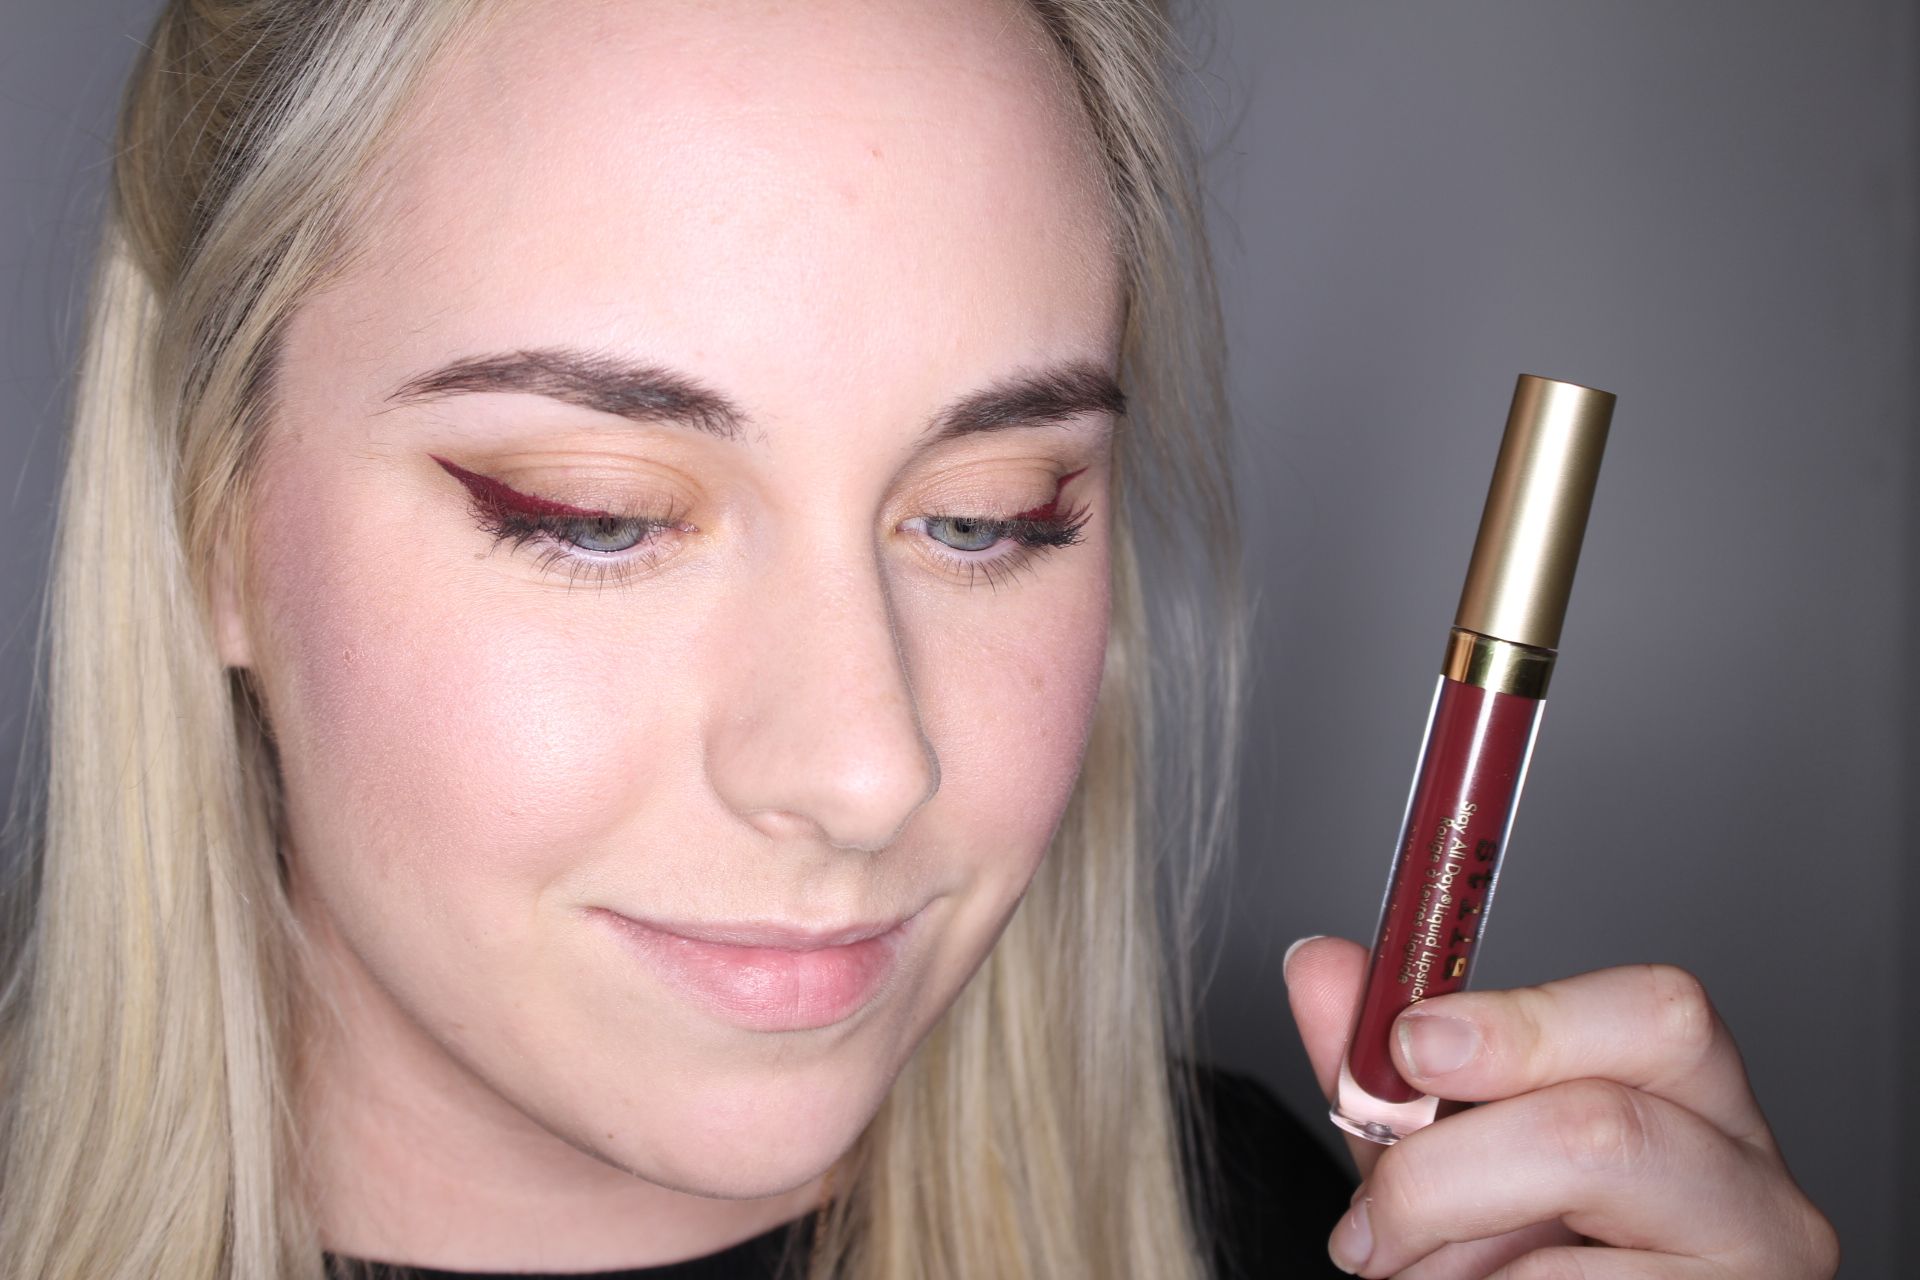 Liquid lipstick as eyeliner? The yes